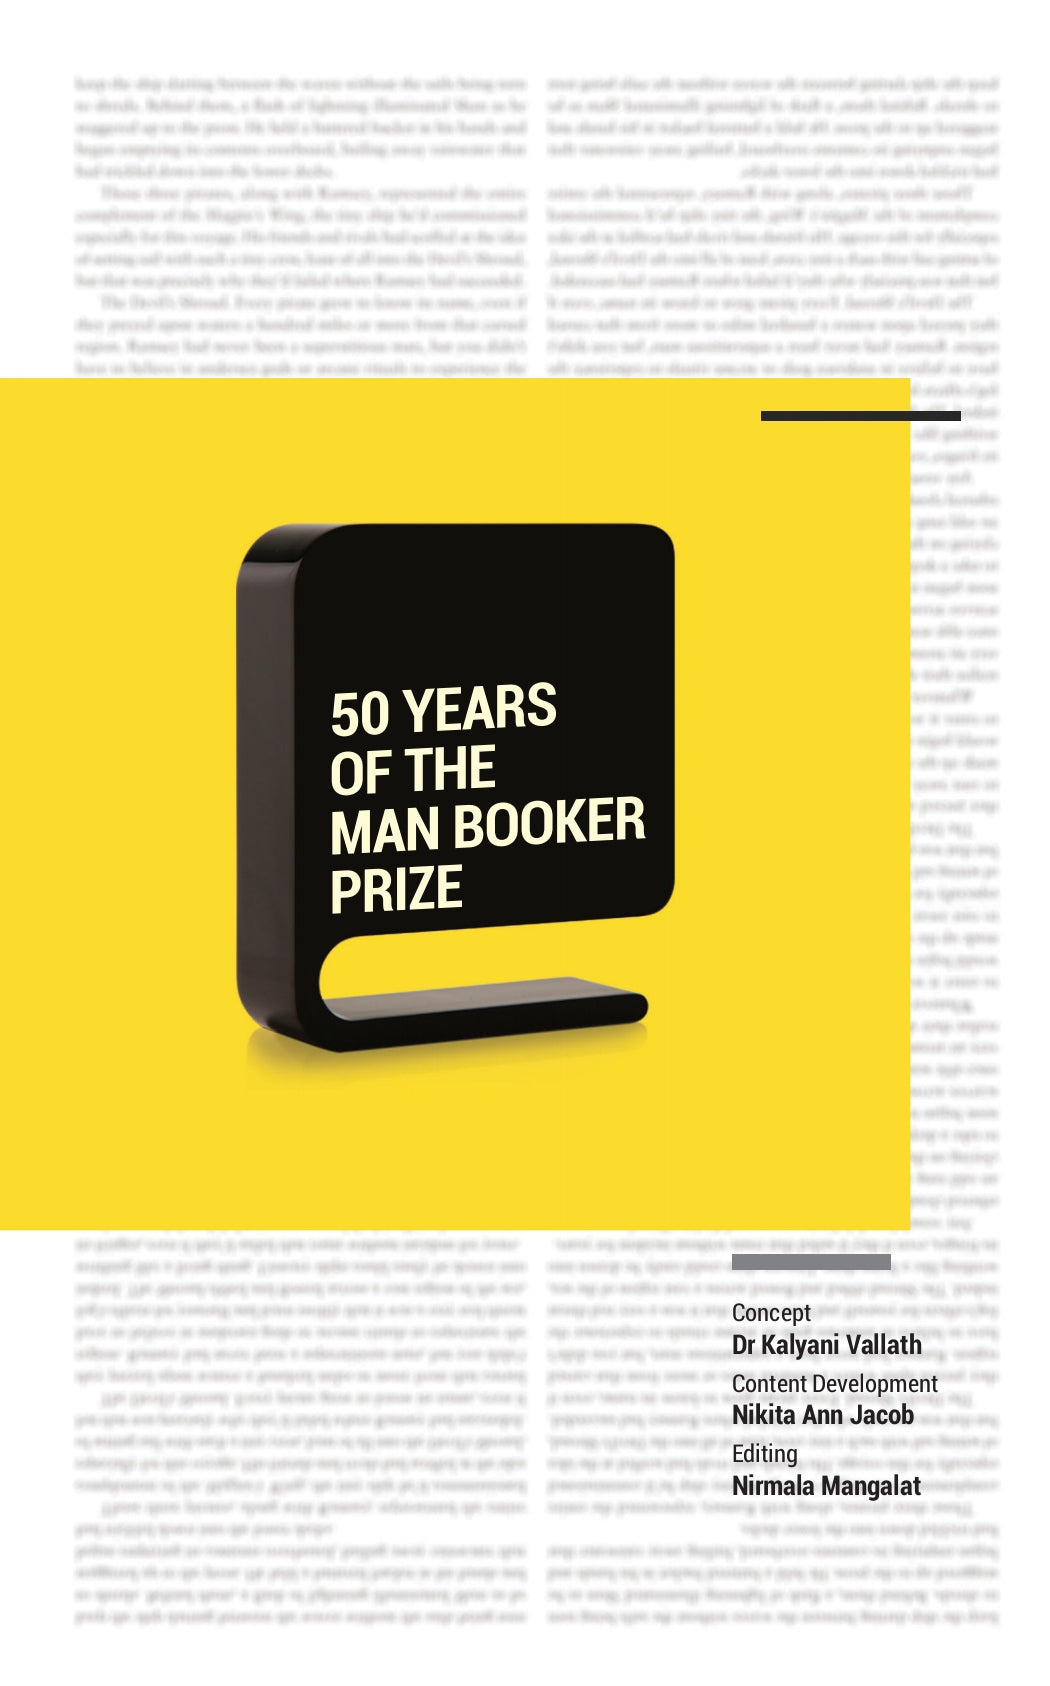 50 YEARS OF THE MAN BOOKER PRIZE